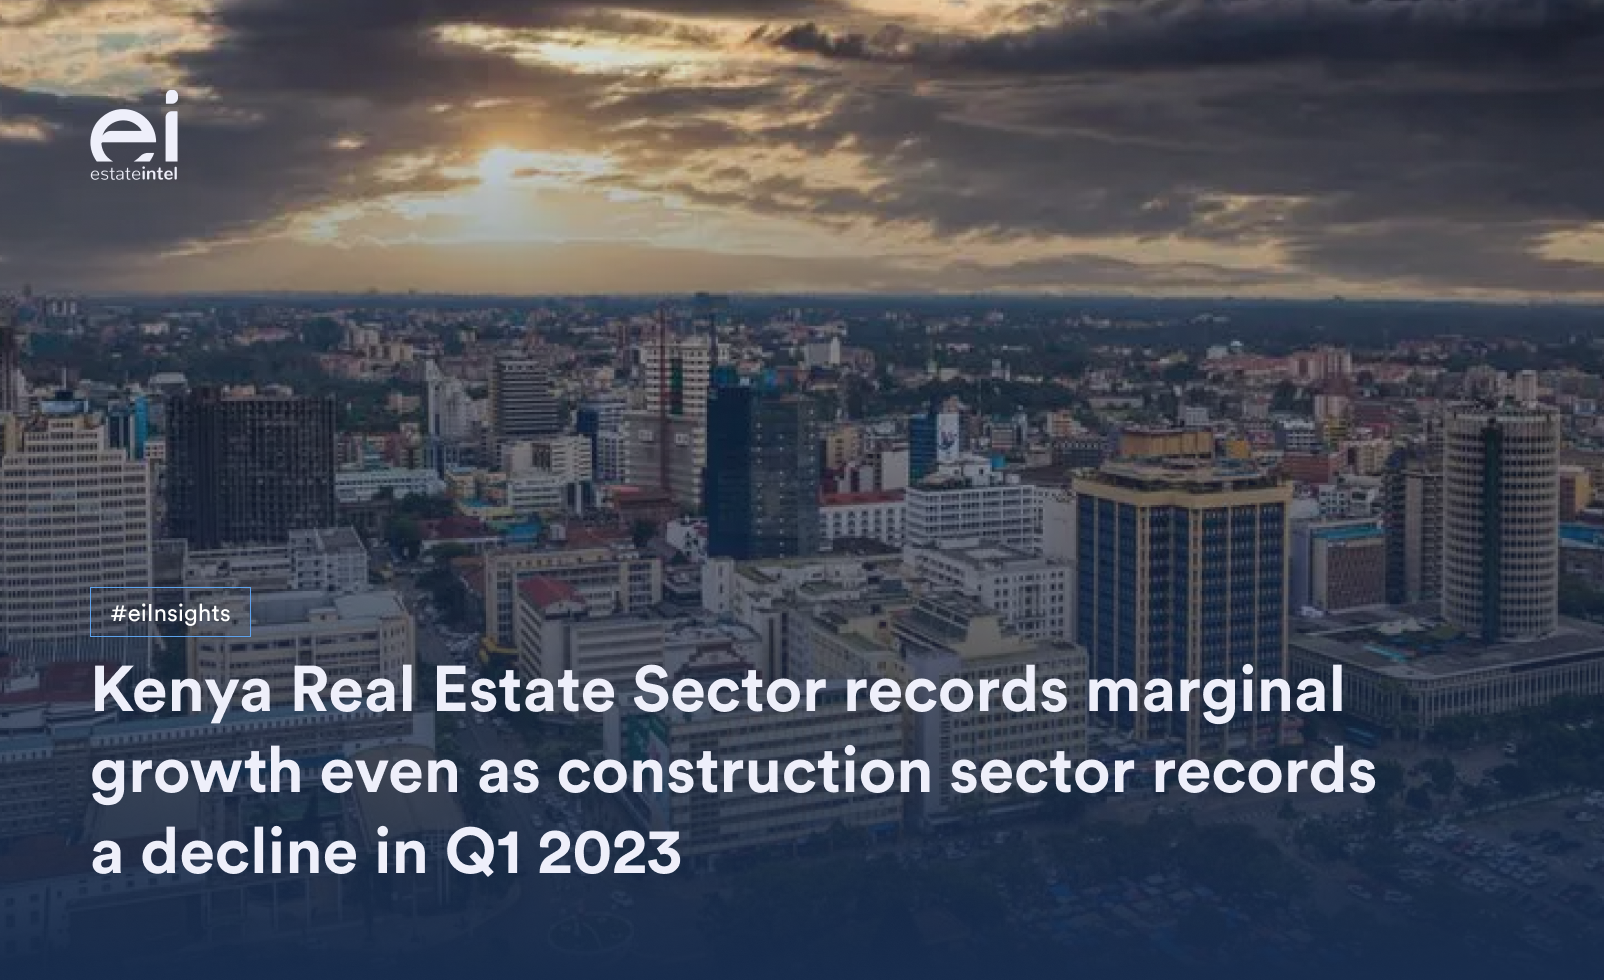 Kenya Real Estate Sector Records Marginal Growth Even As Construction Sector Records A decline in Q1:2023